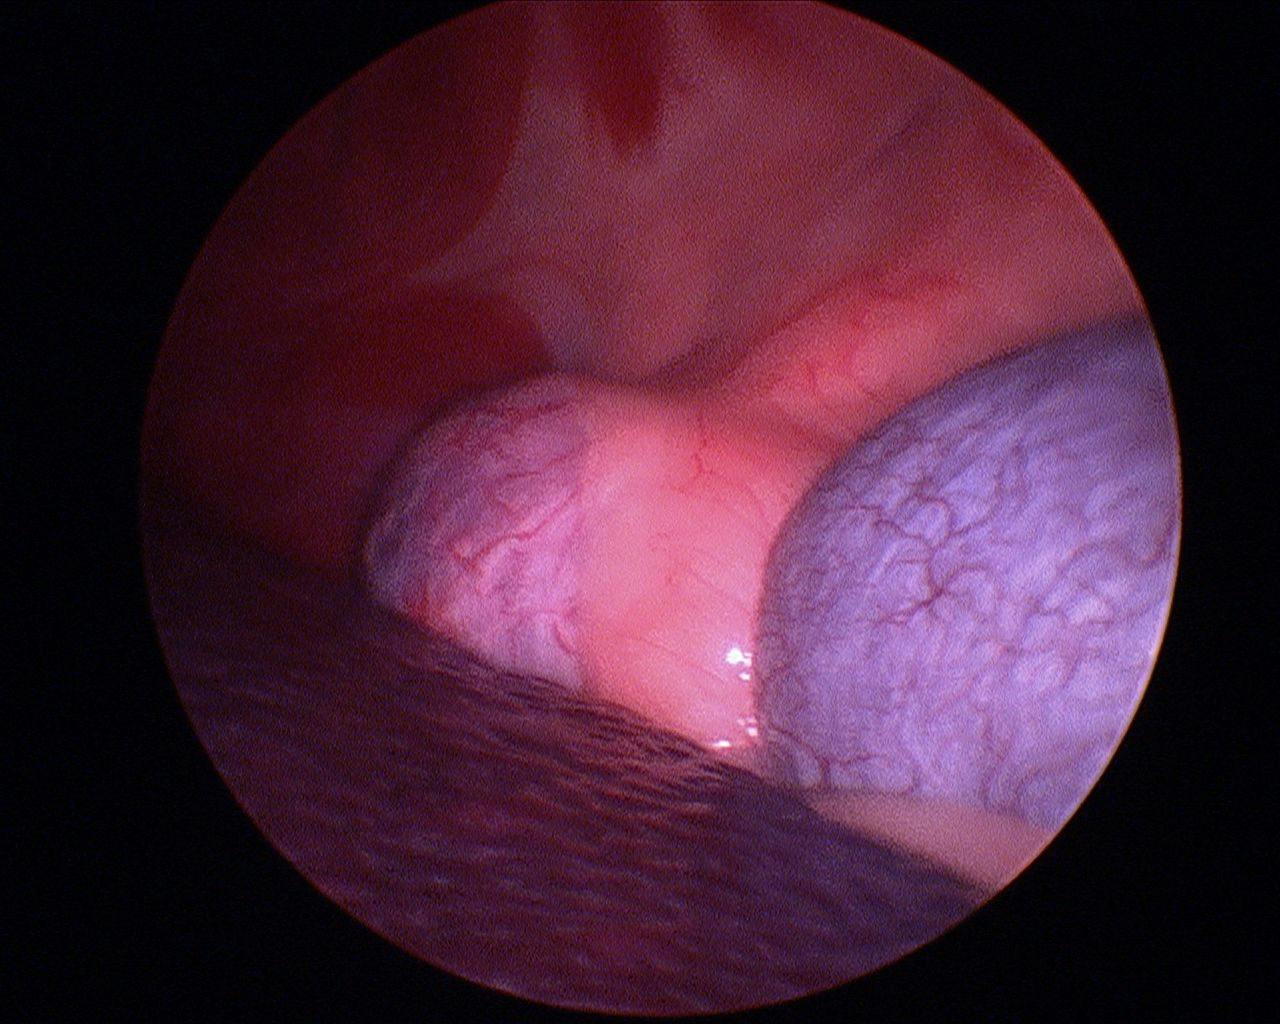 Large left adrenal tumor pictured next to the kidney prior to beginning a laparoscopic adrenalectomy.